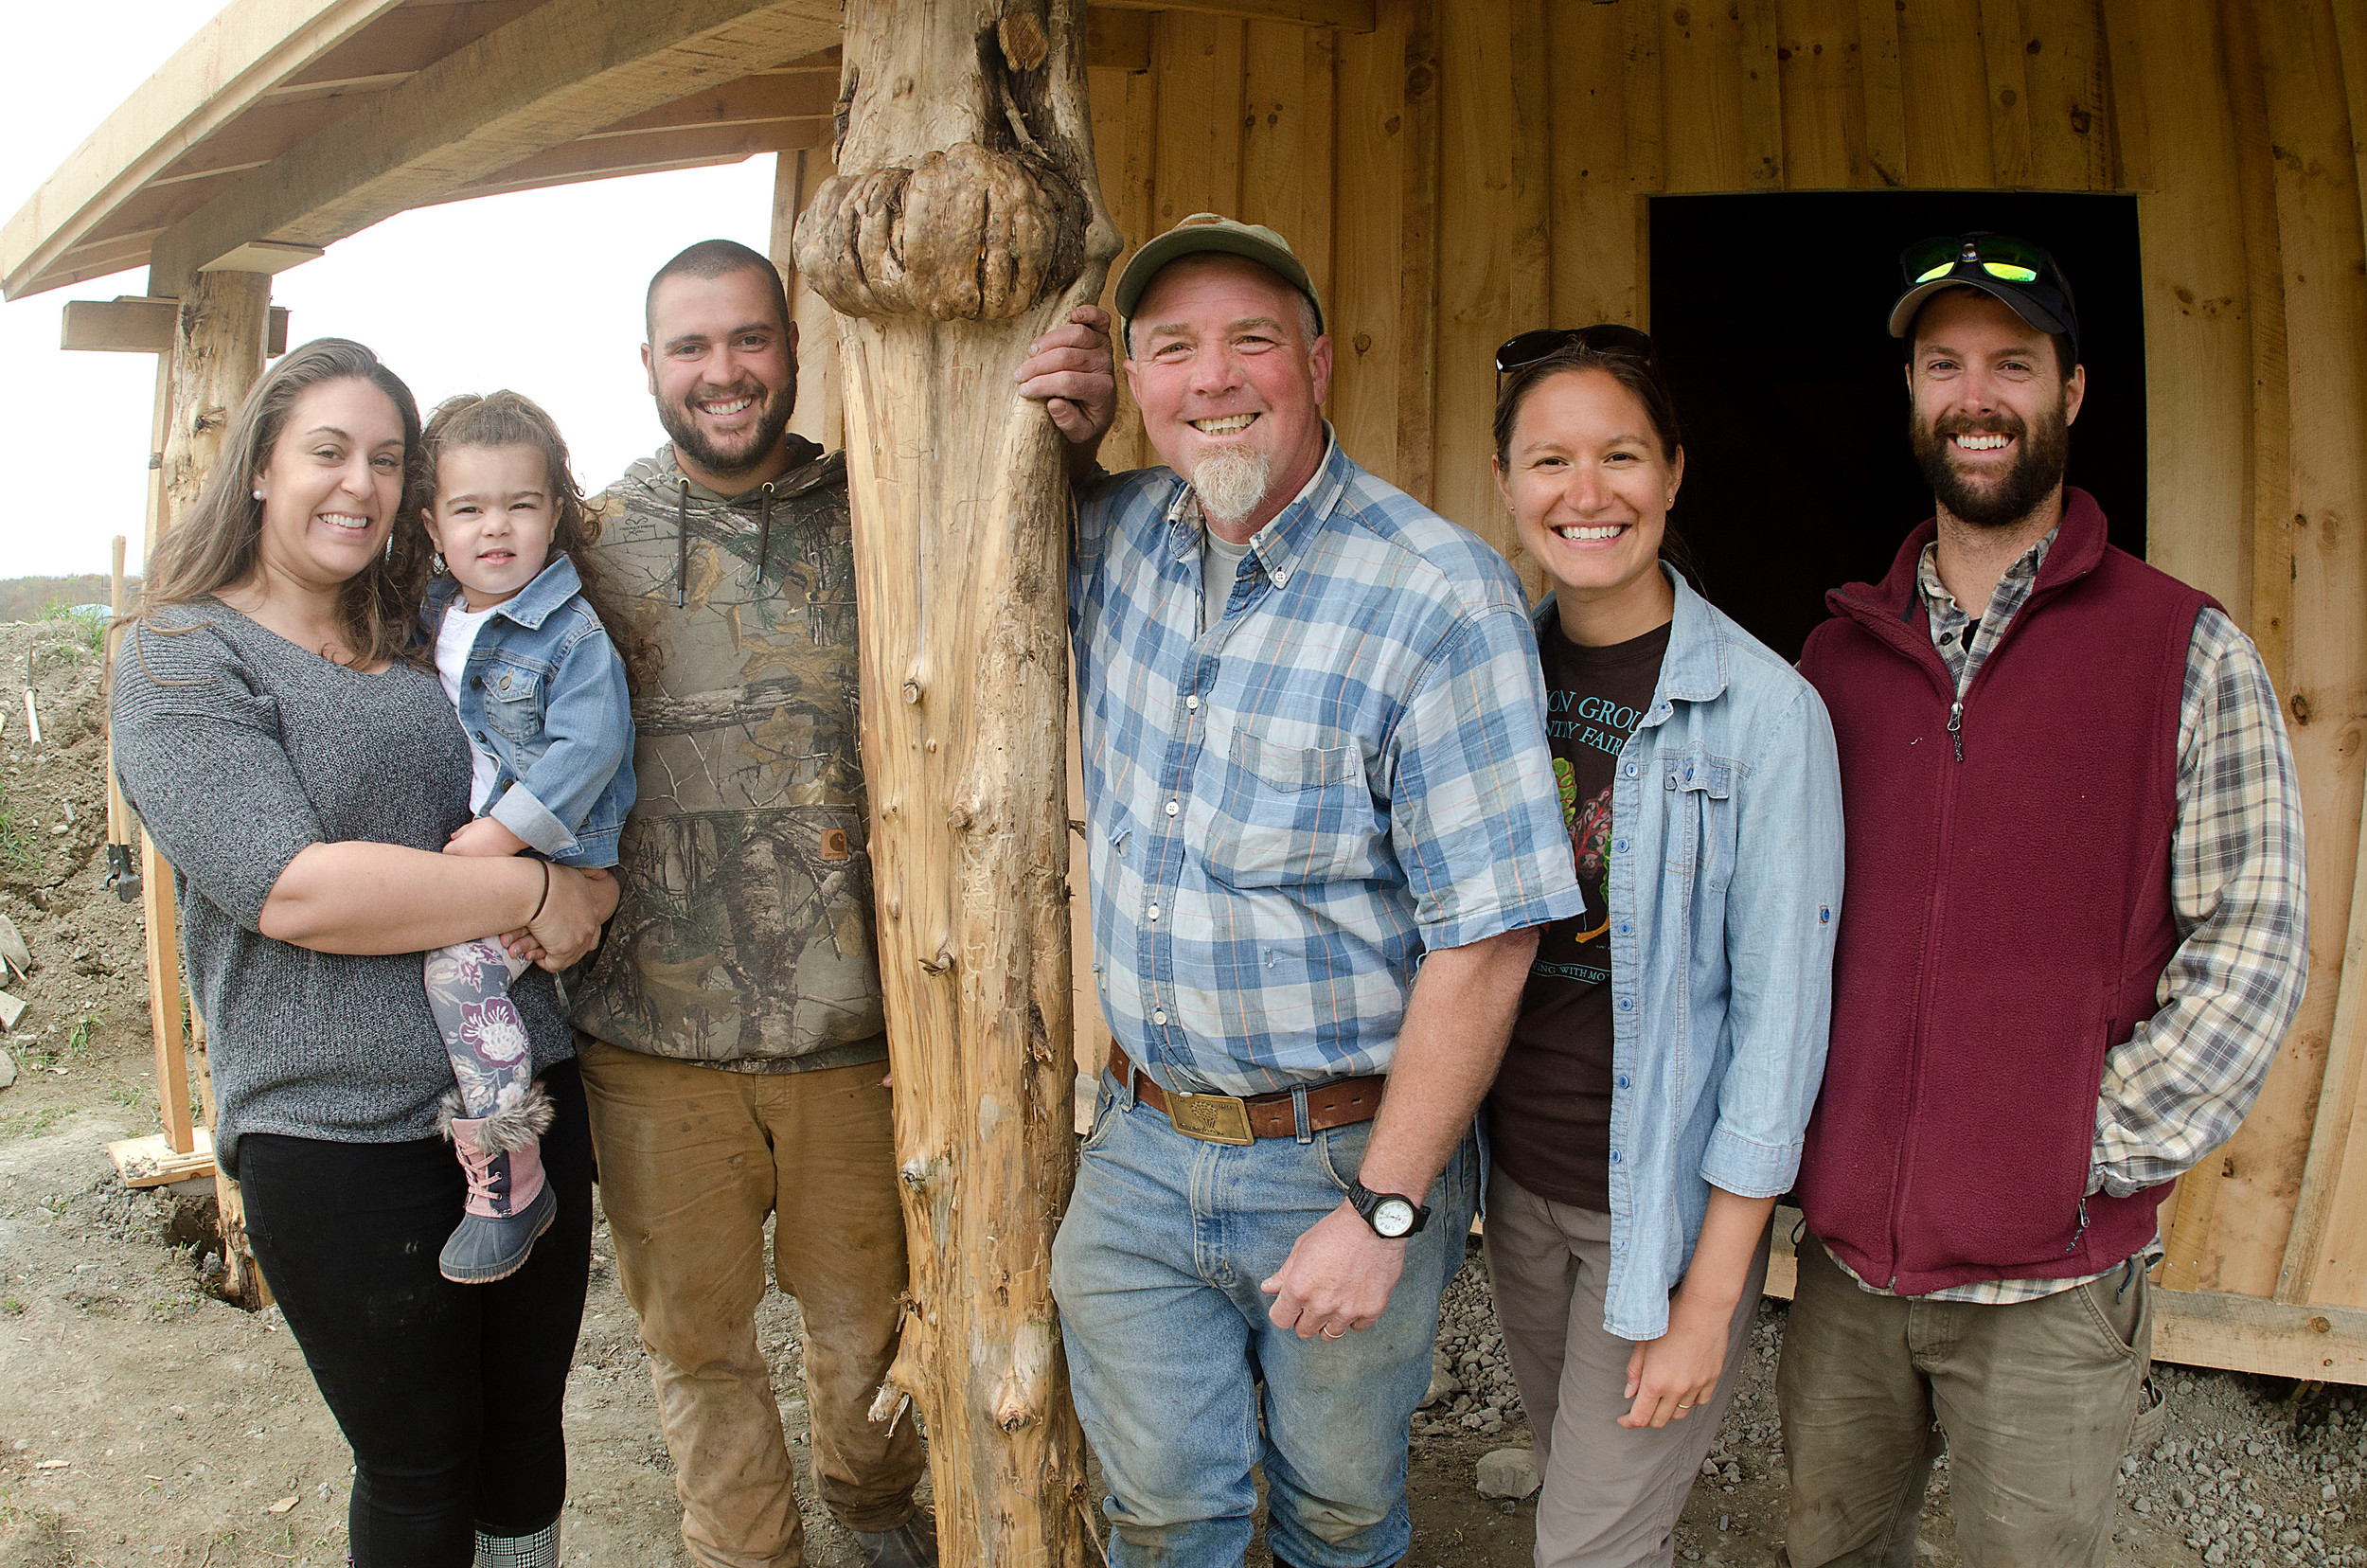 Some members of the Cloverbud Ranch “dream team”: Felicia DaSilva, her daughter Sienna, 3, Joshua DaSilva, Martin Beck and Amy and Andrew Smith (from left).